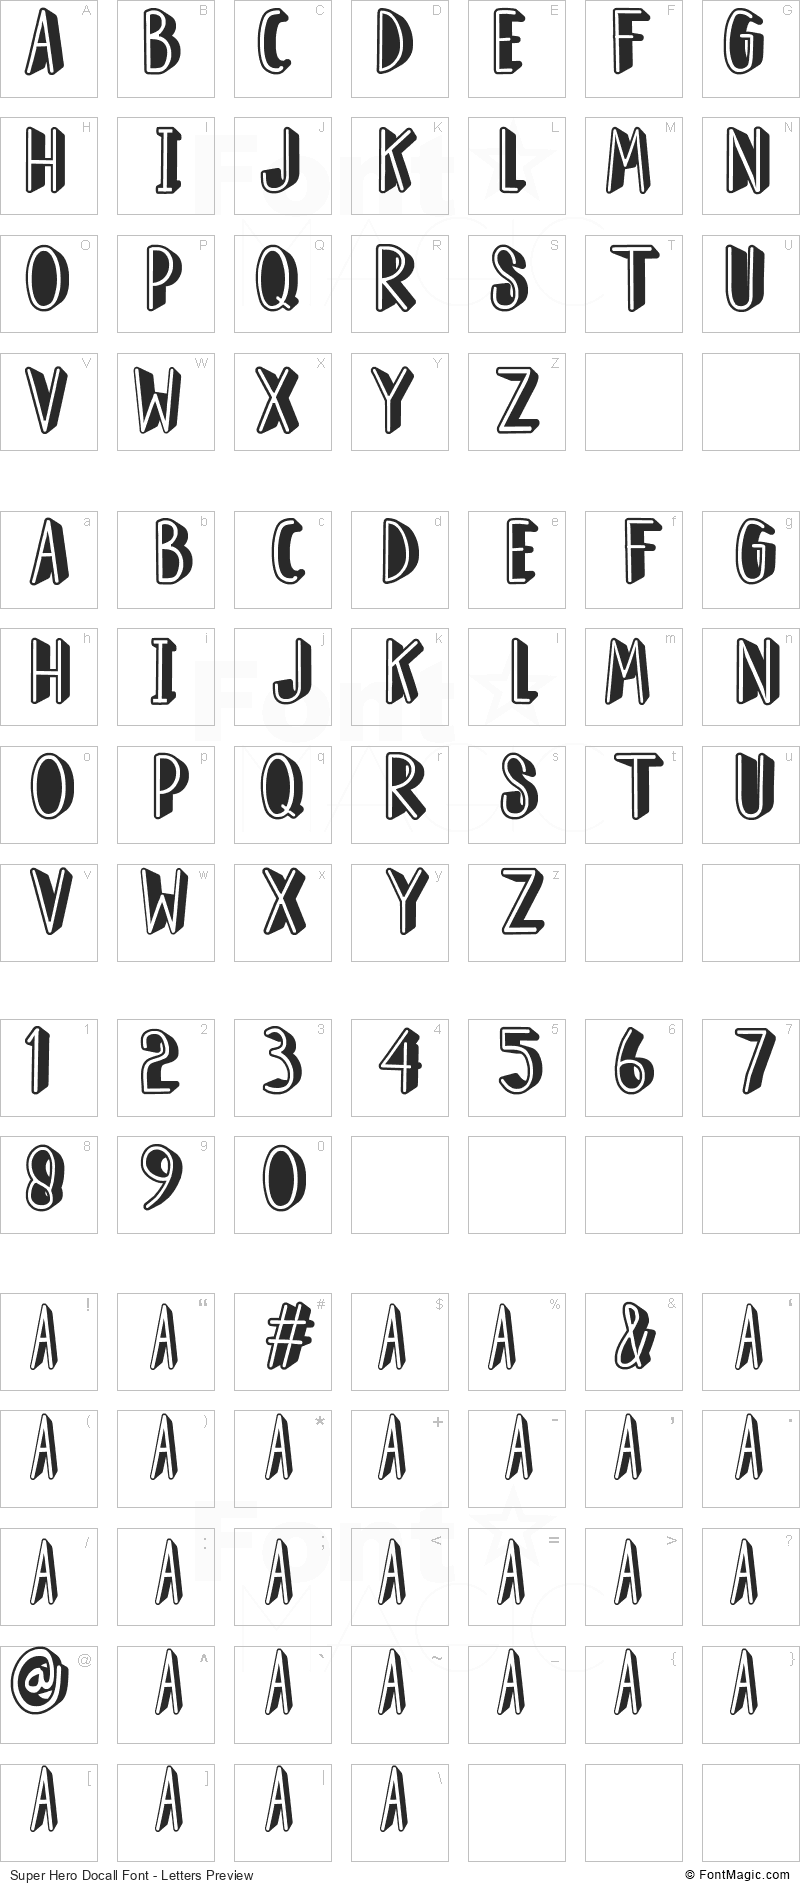 Super Hero Docall Font - All Latters Preview Chart